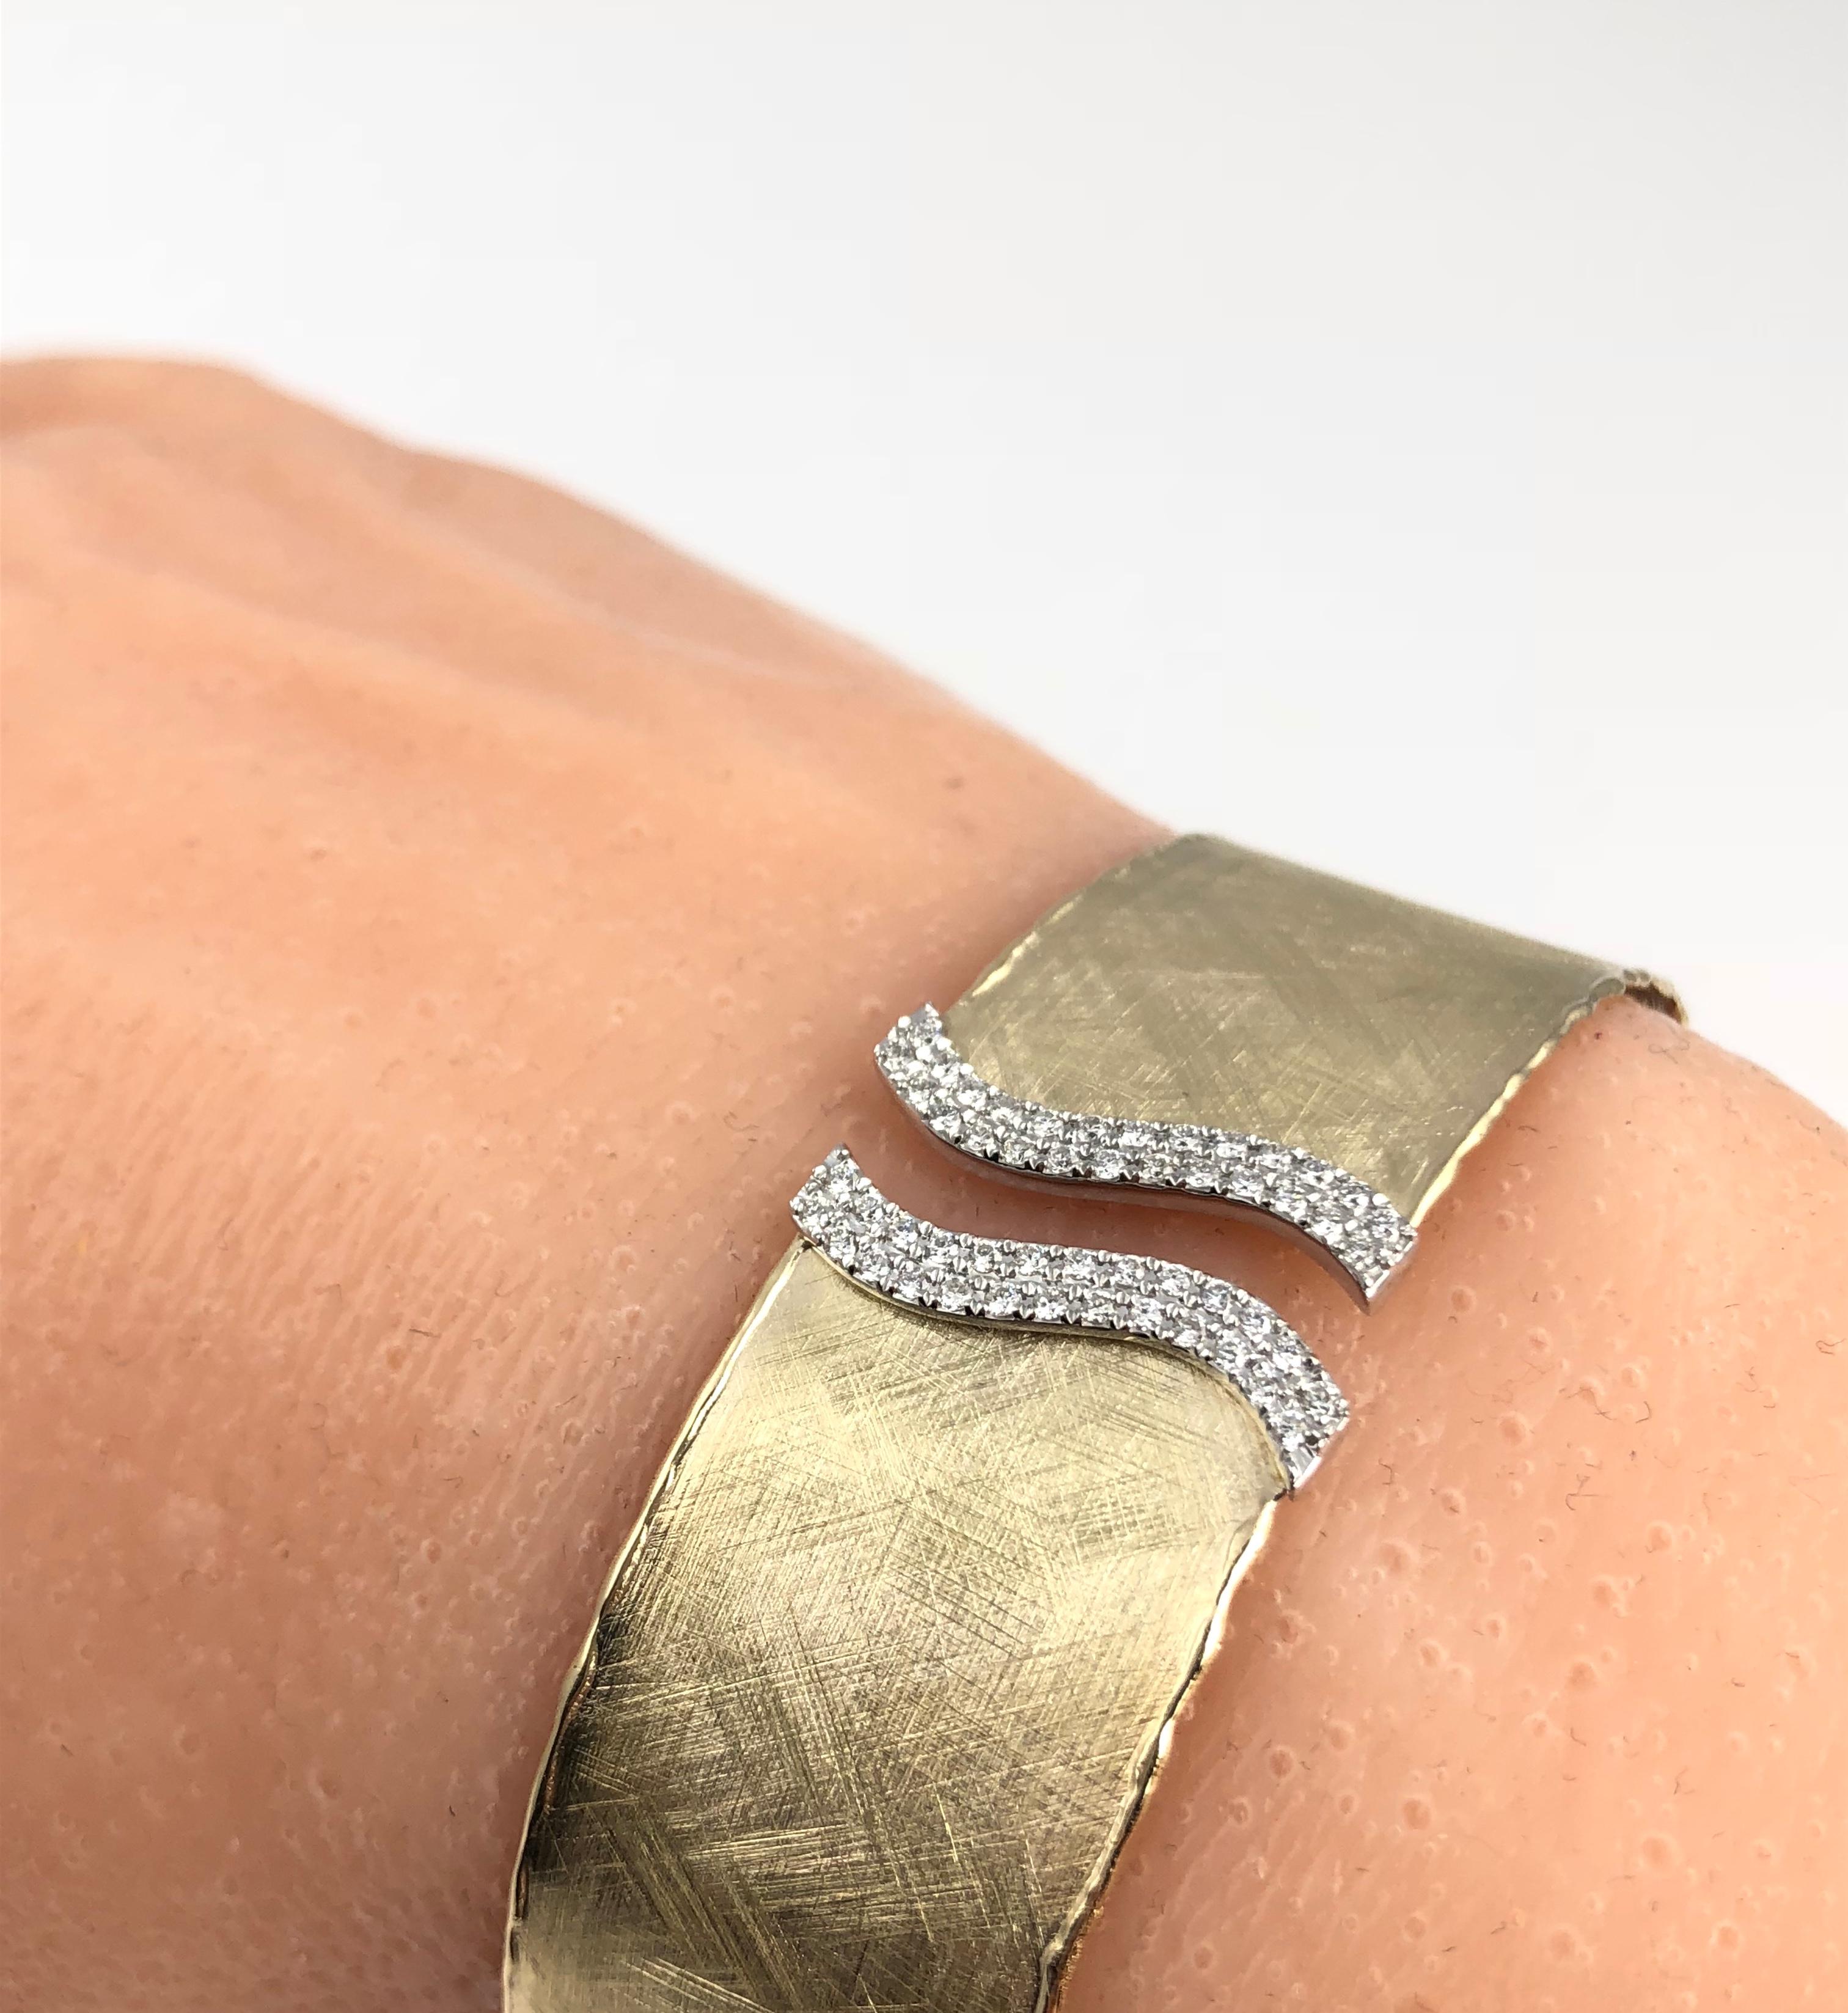 (DiamondTown) This rustic bangle has a brushed yellow gold design, accented by two swirls of round white diamonds at the opening. The bangle is flexible enough to pass over the hand, without any hinge or buckle.

The bangle is set in 14k Yellow and